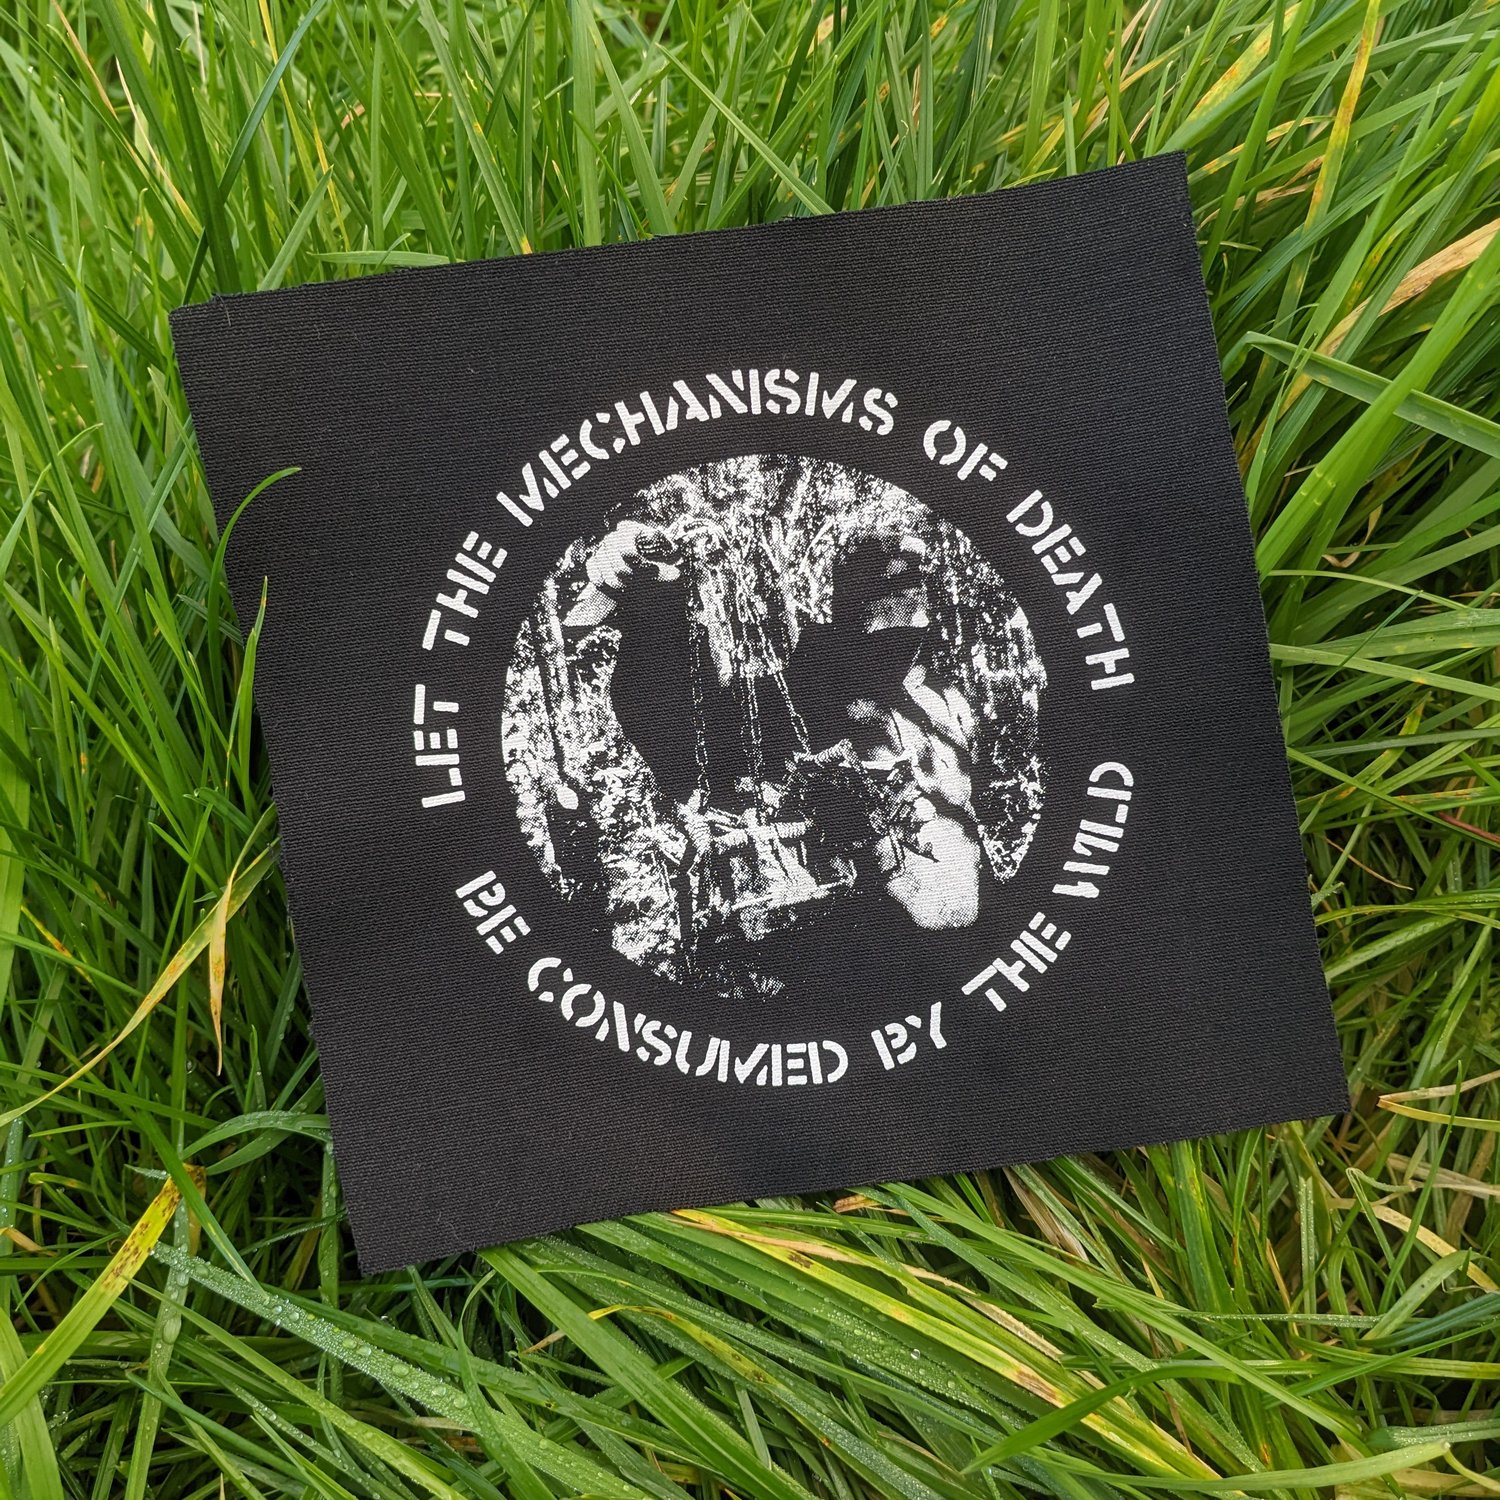 'Let the Mechanisms of Death be Consumed by the Wild' patch